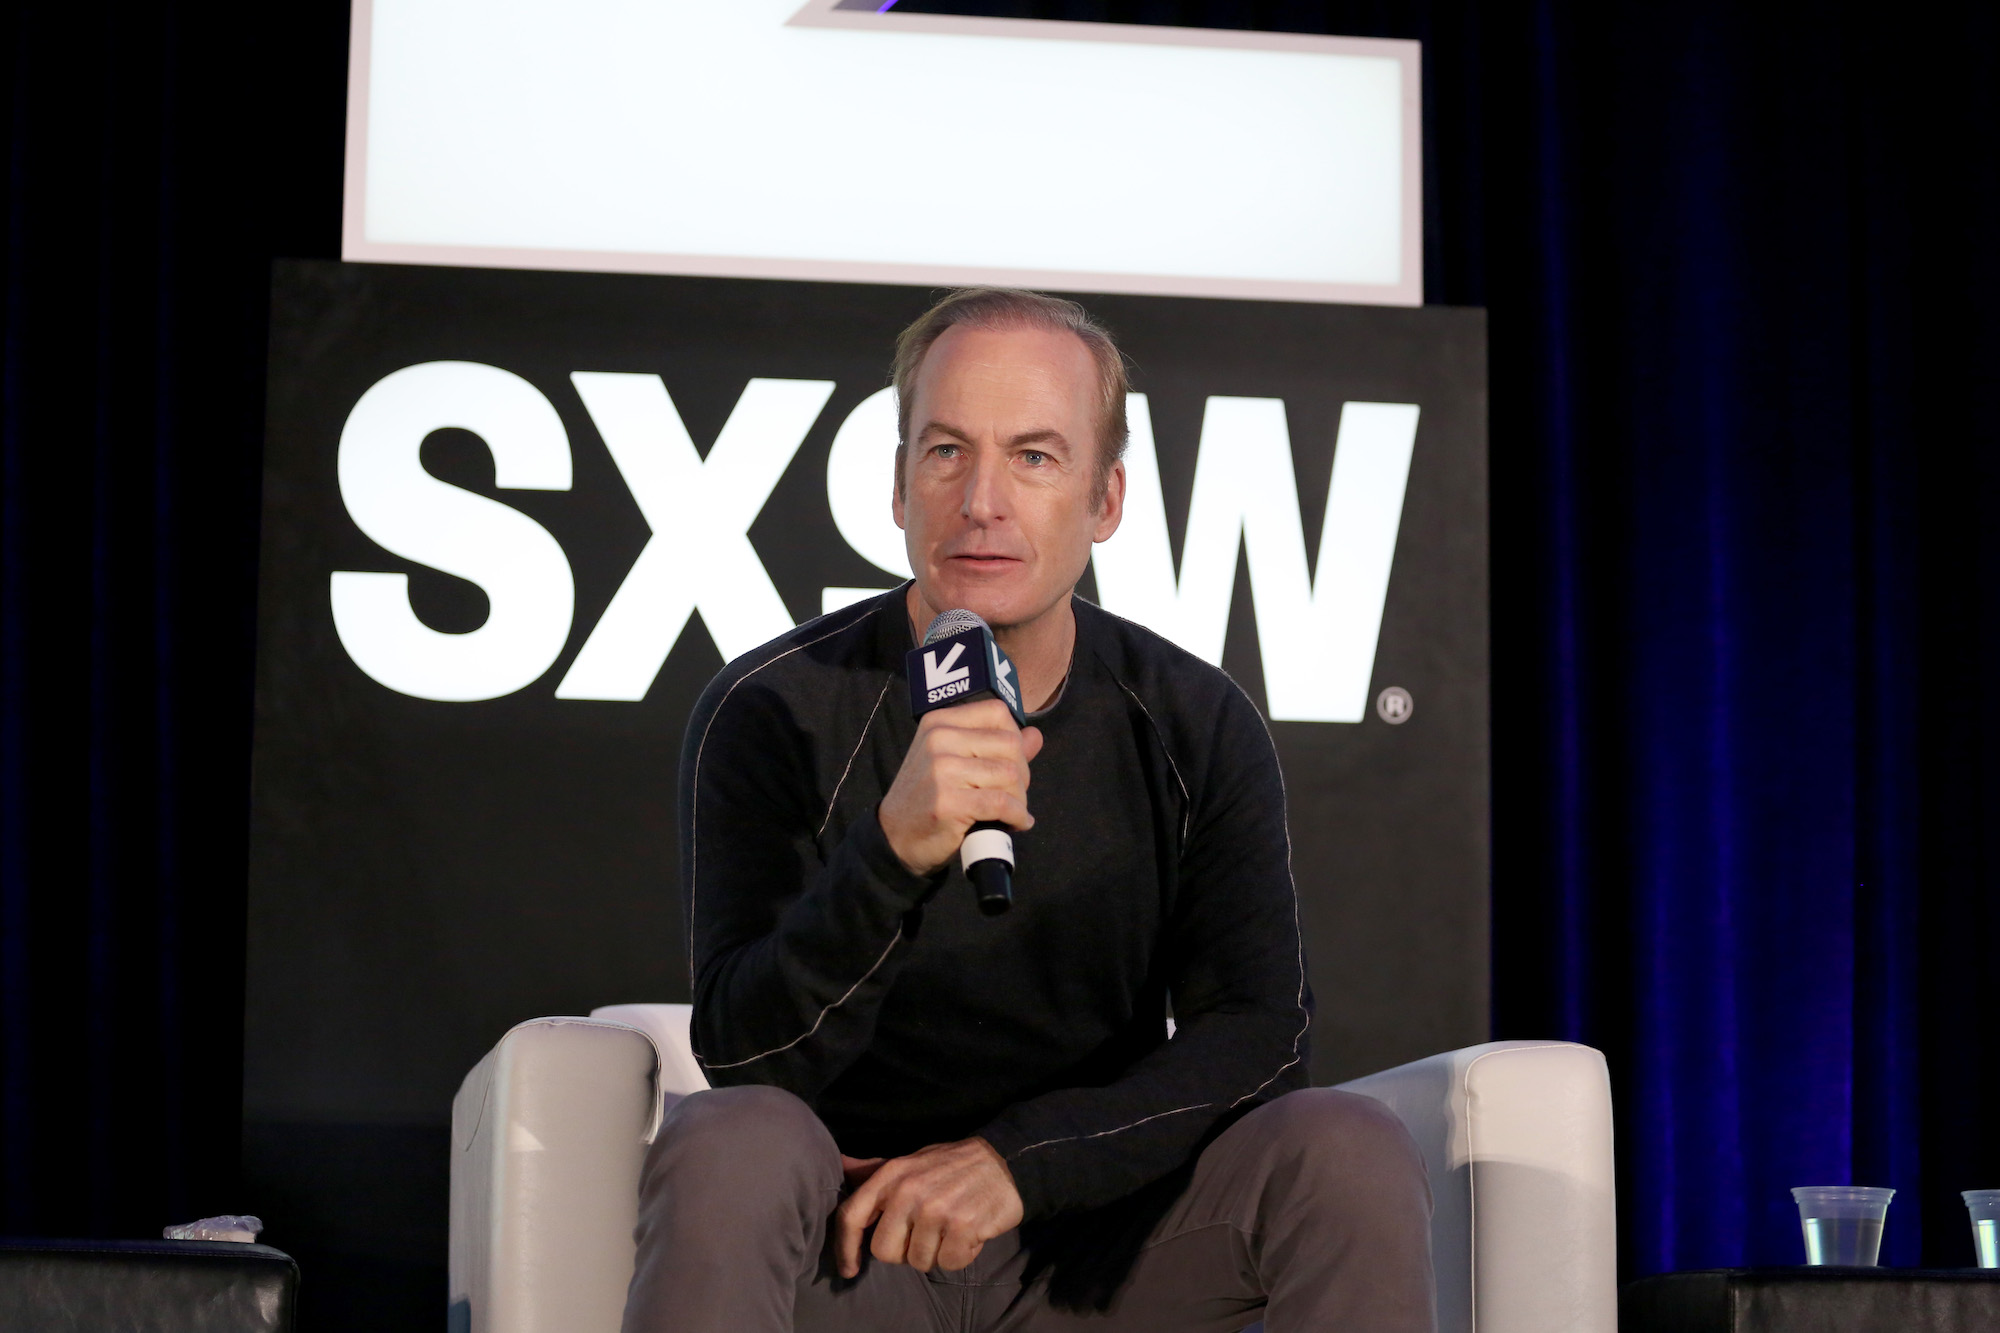 'Better Call Saul' star Bob Odenkirk sits on a chair and speaks into a microphone at SXSW